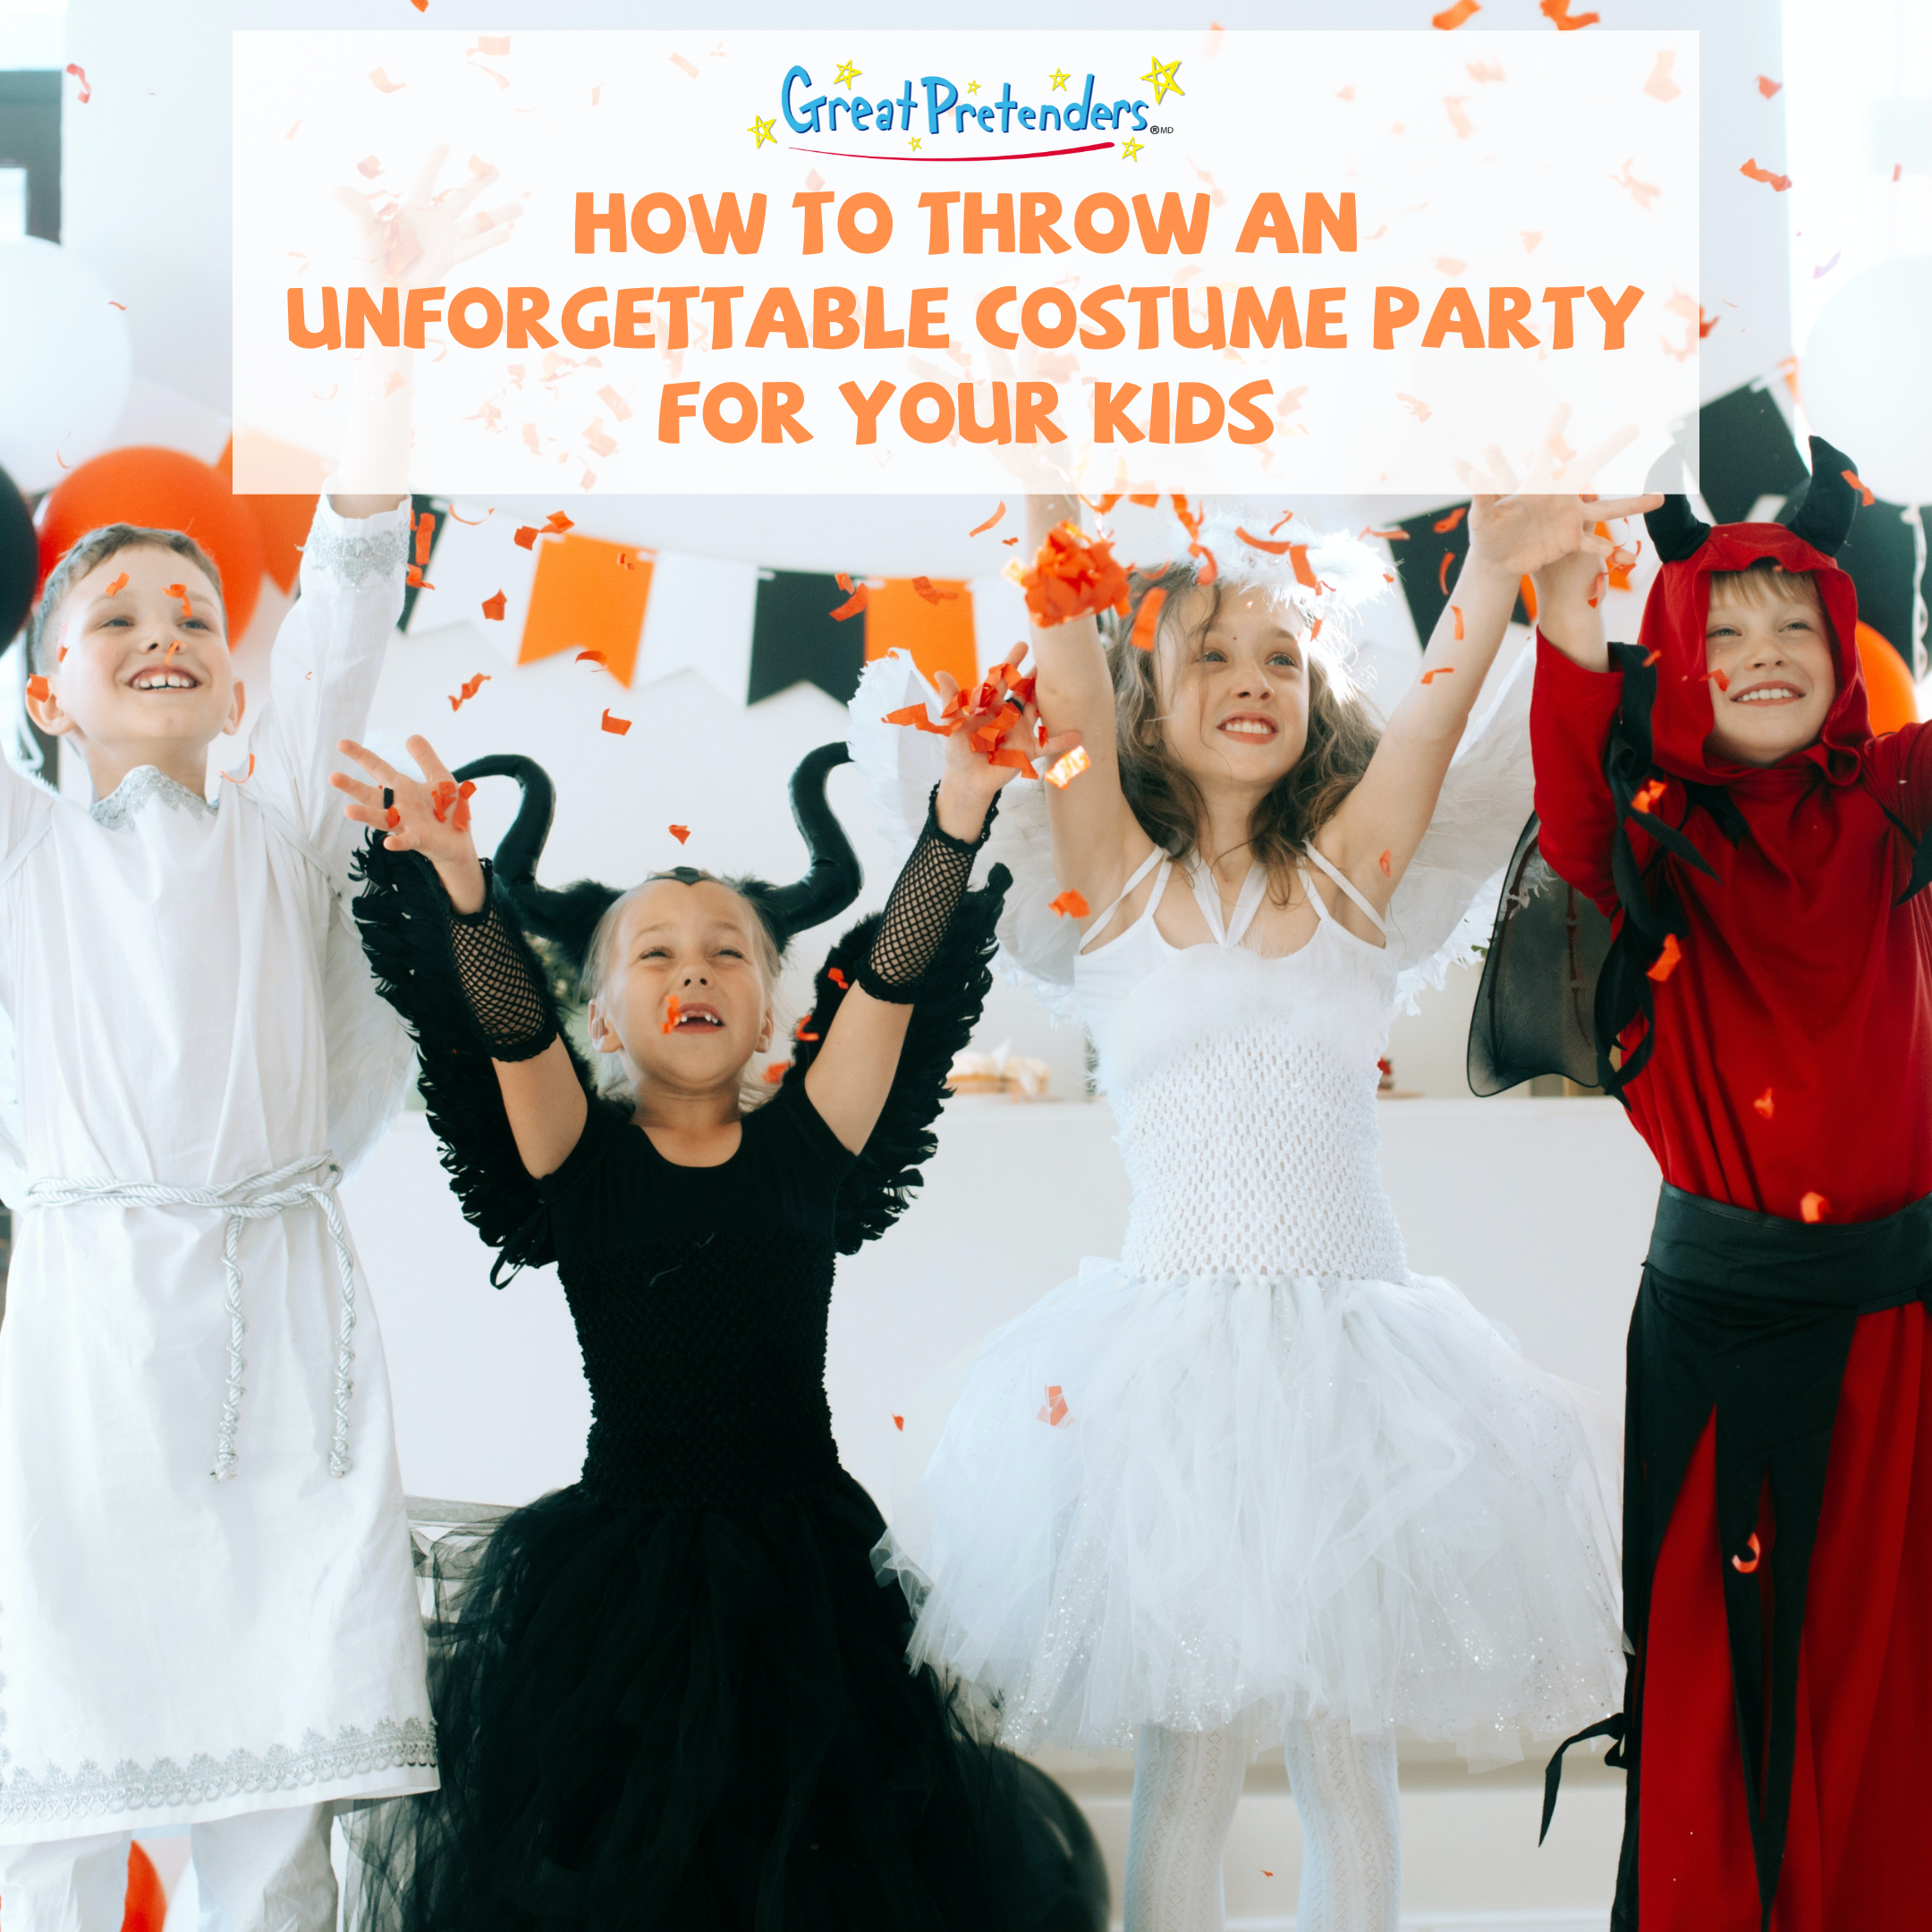 How to Throw an Unforgettable Costume Party for Your Kids